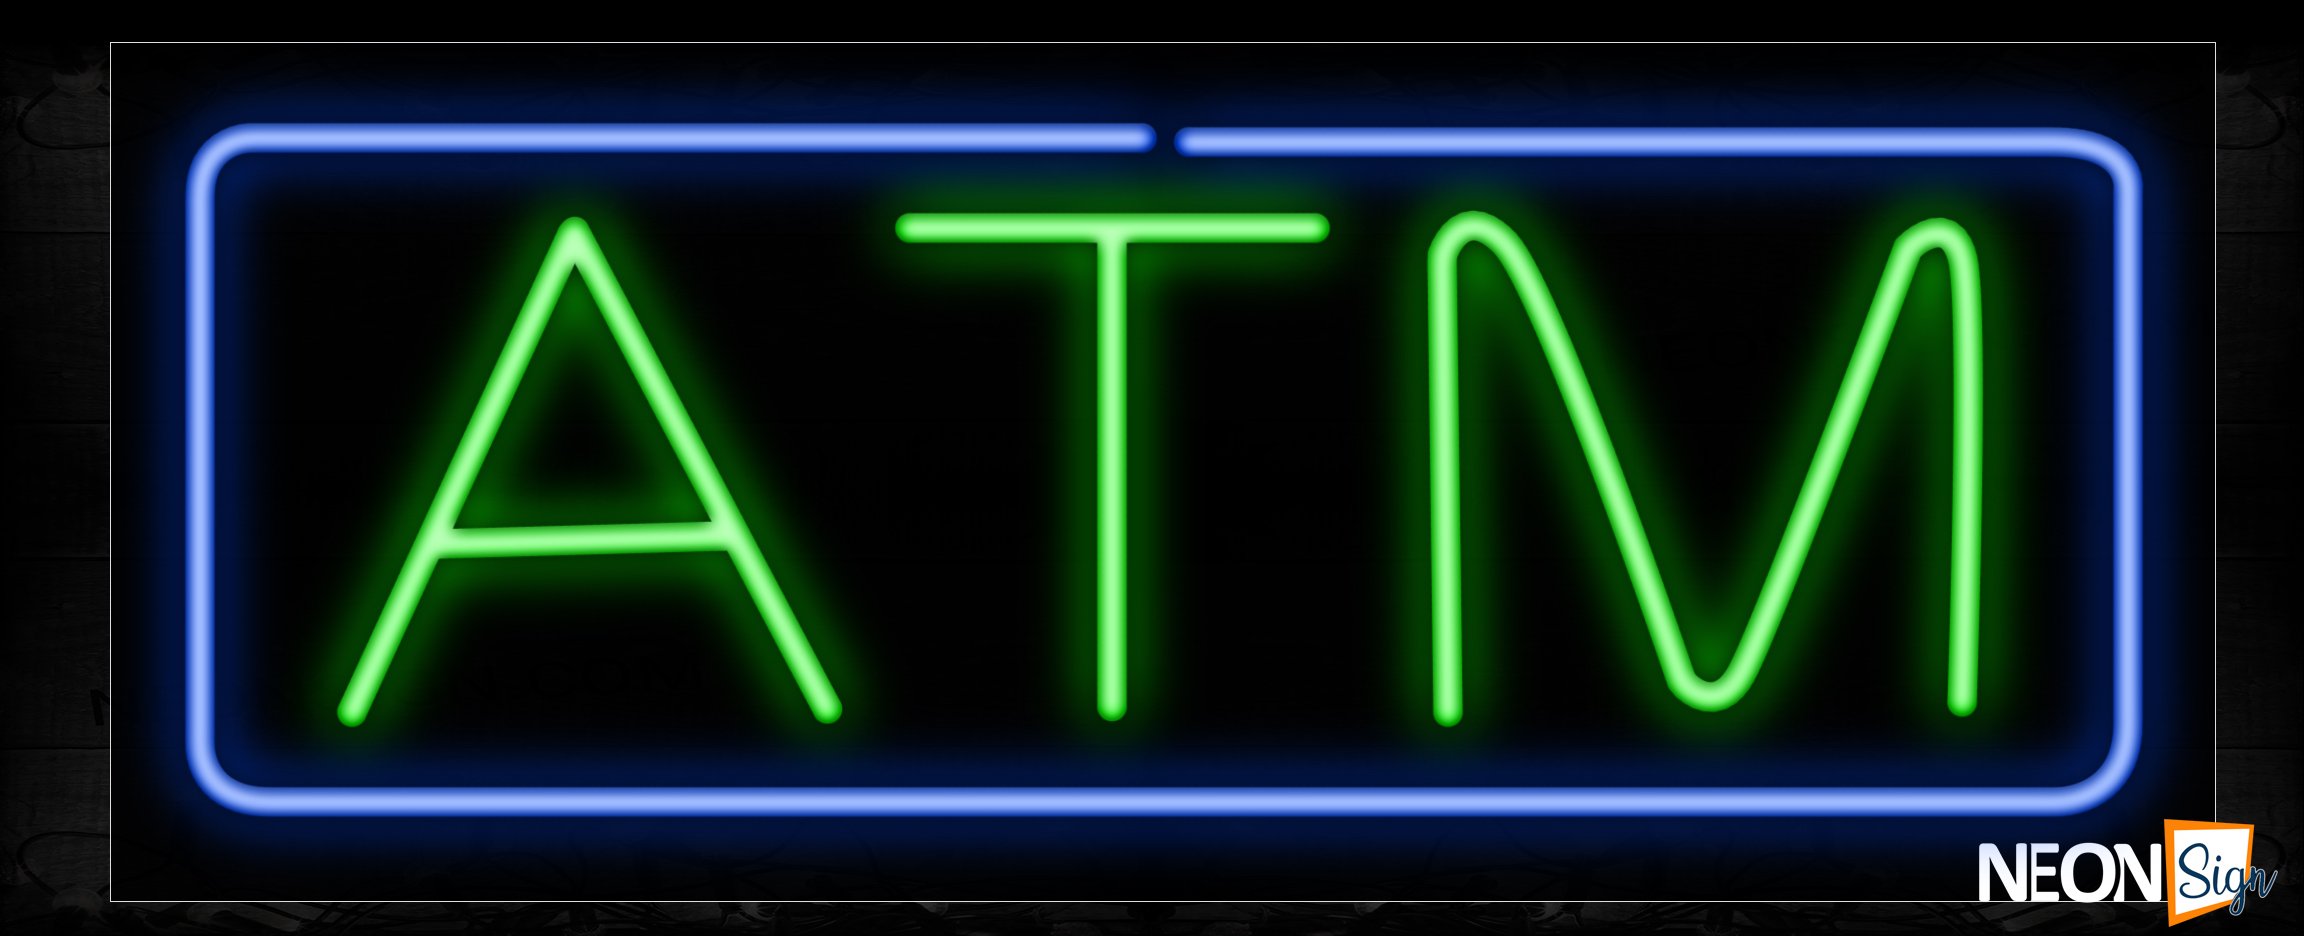 Image of 10010 ATM in green with blue border Neon Sign_13x32 Black Backing